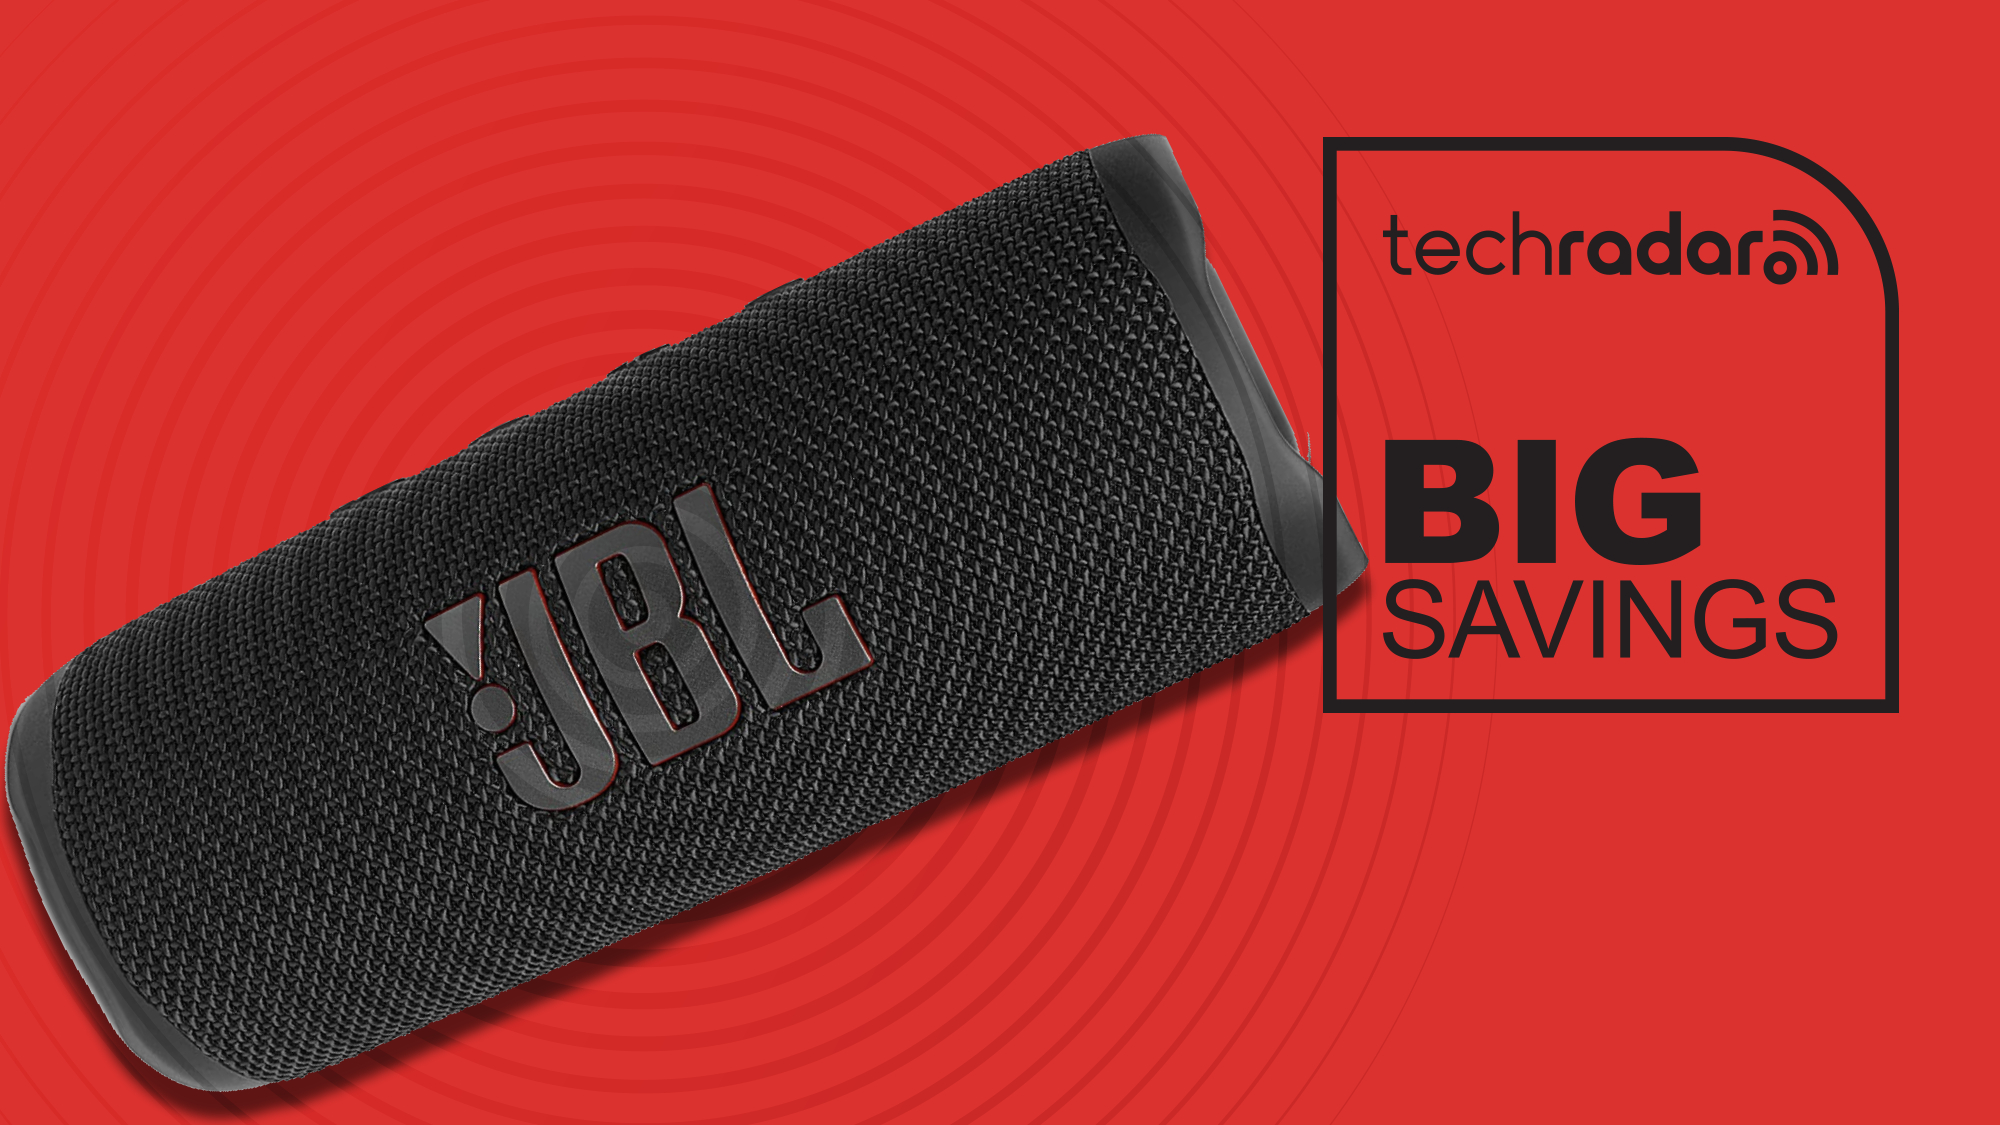 The JBL Flip 6 is a steal at just $89.95 in this Prime Day pick - SoundGuys